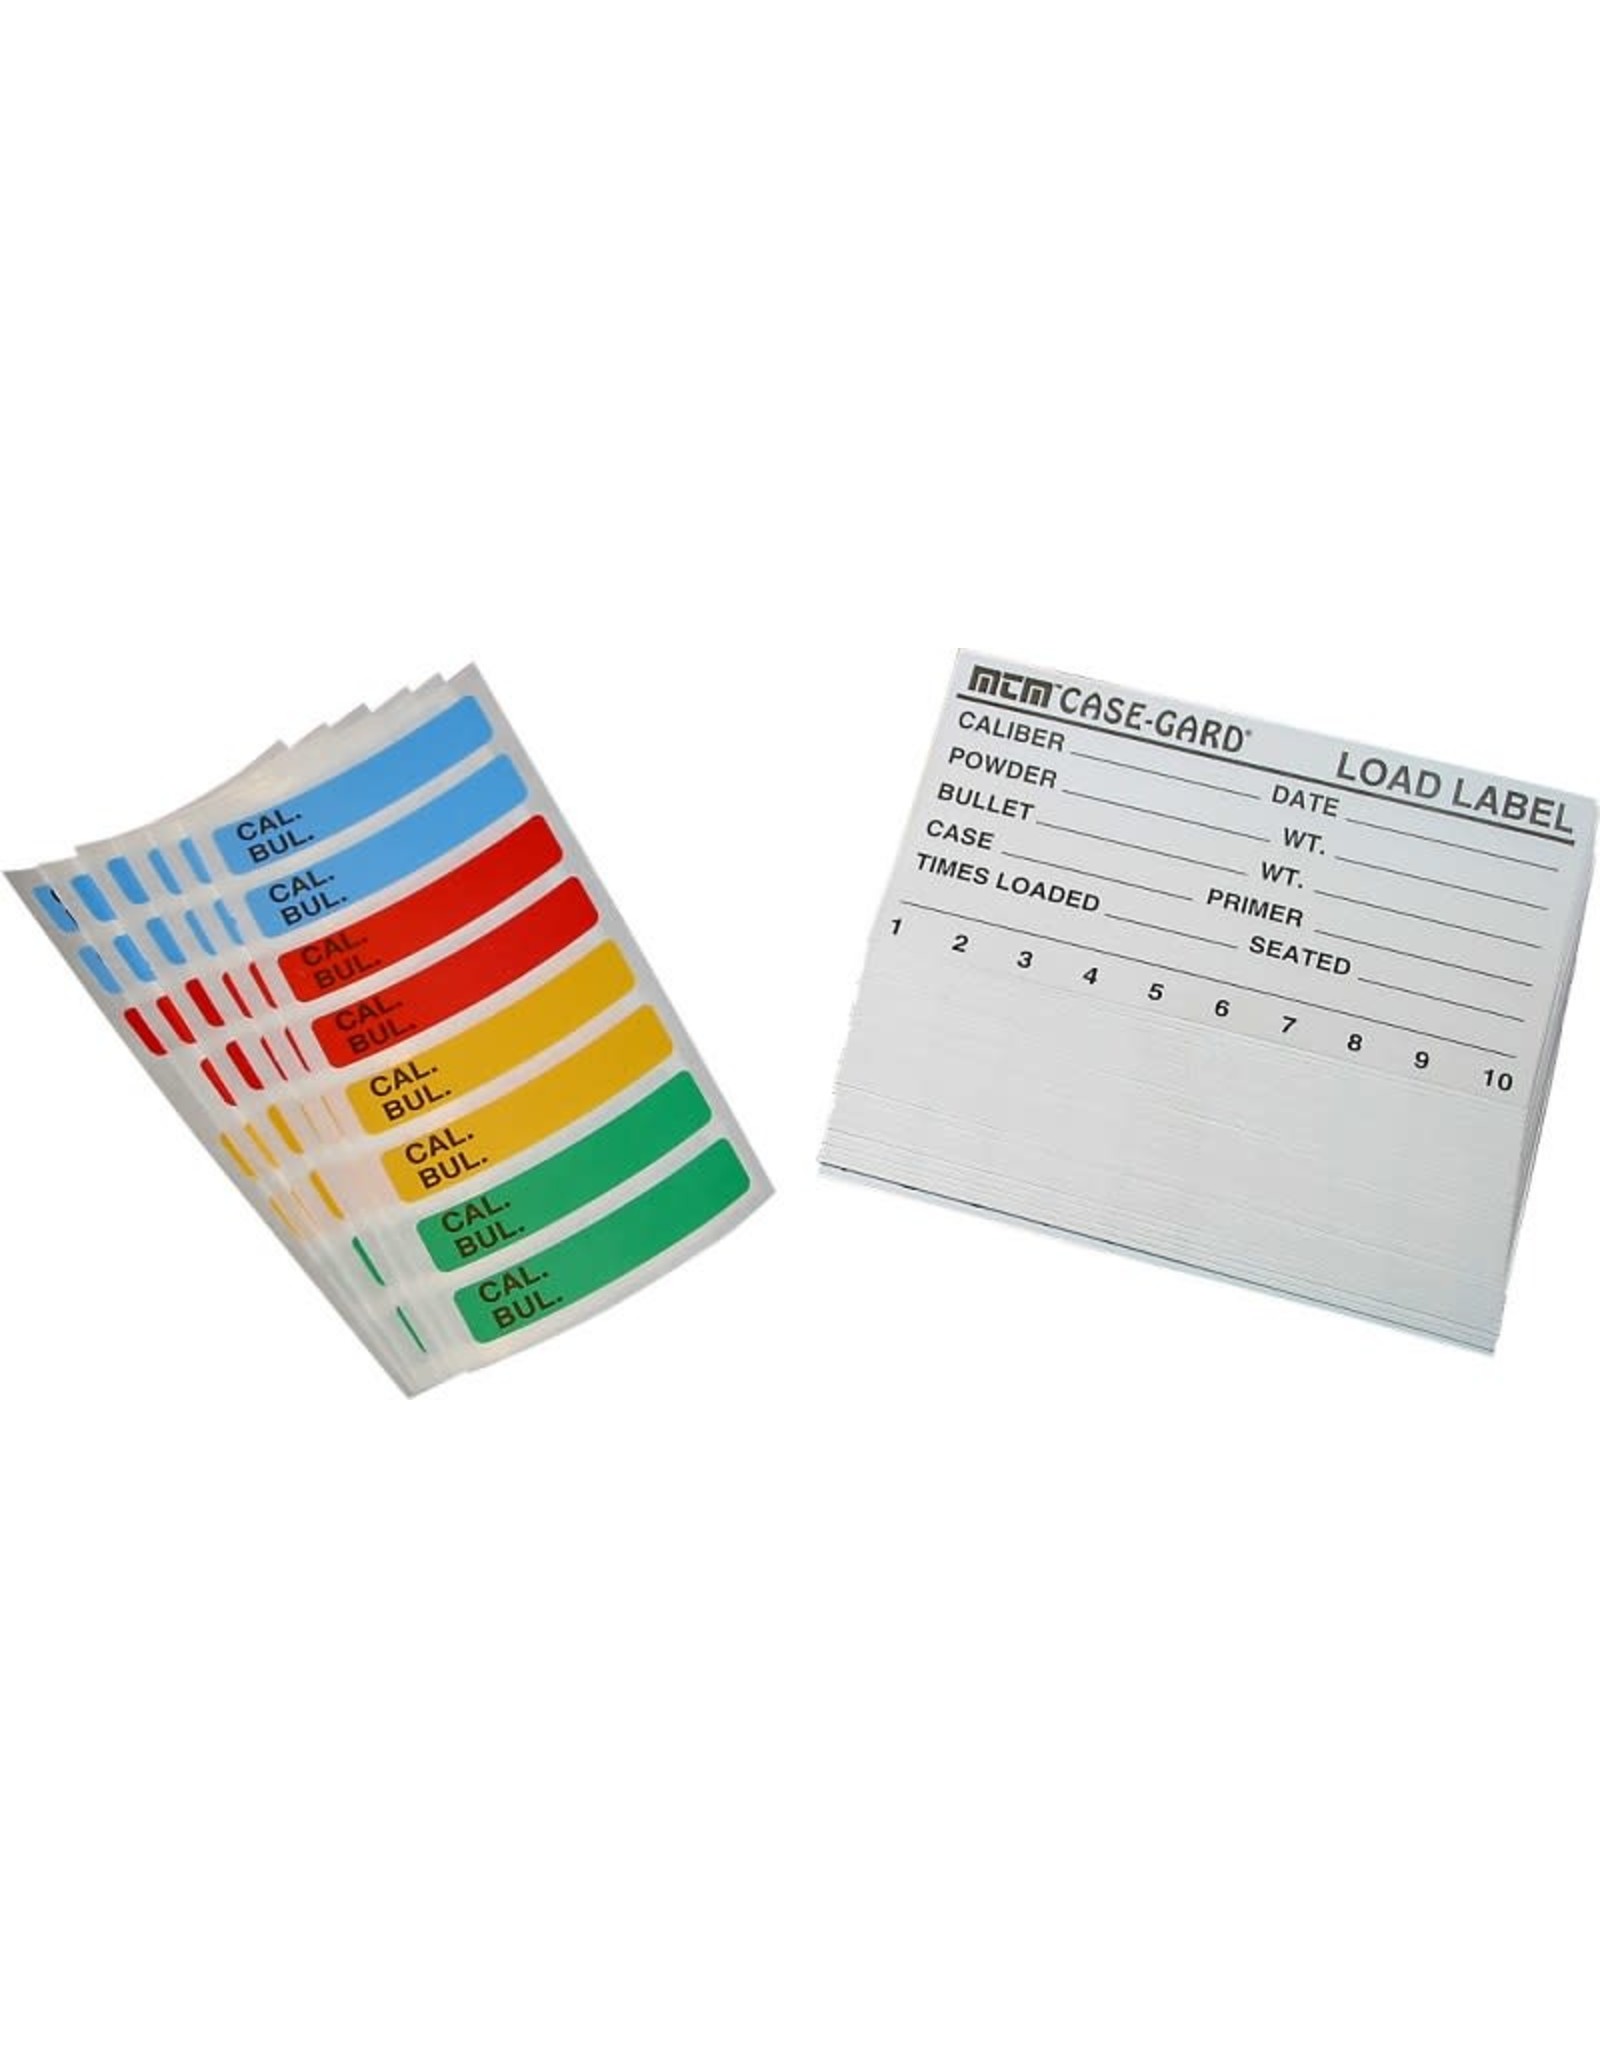 MTM MOLDED PRODUCTS MTM Reloading Labels